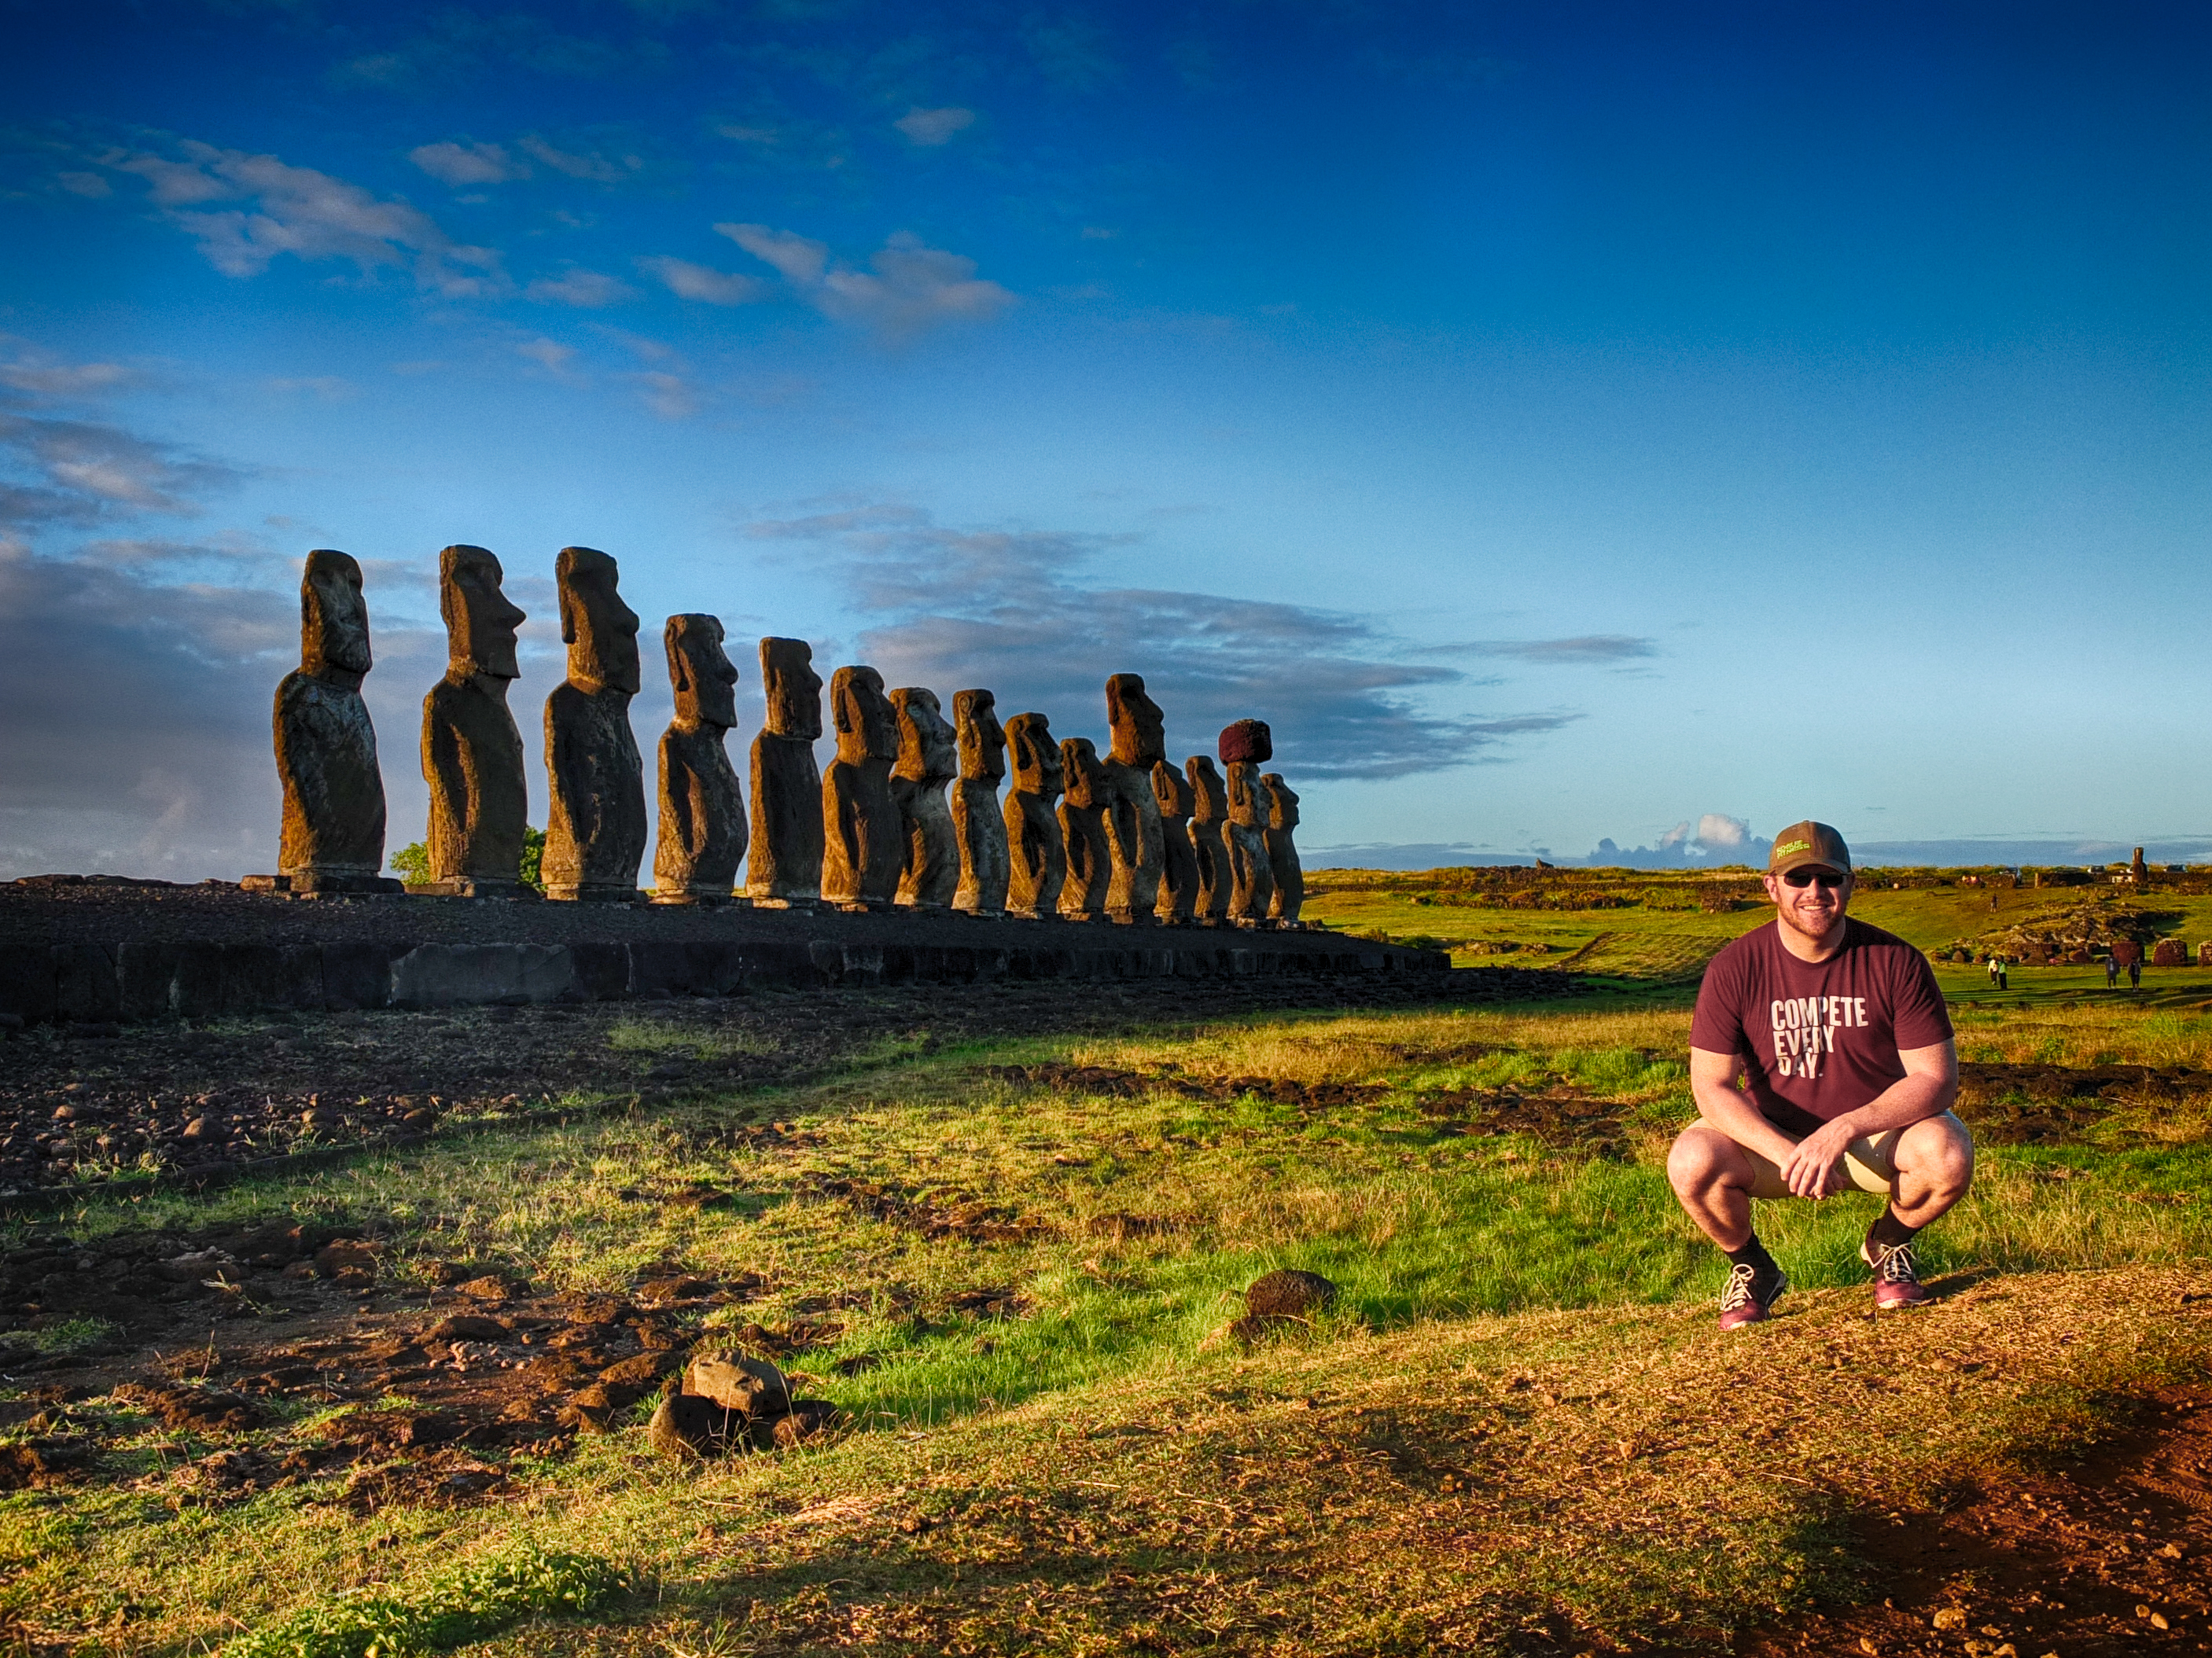 a man squatting in front of a row of statues with Easter Island in the background